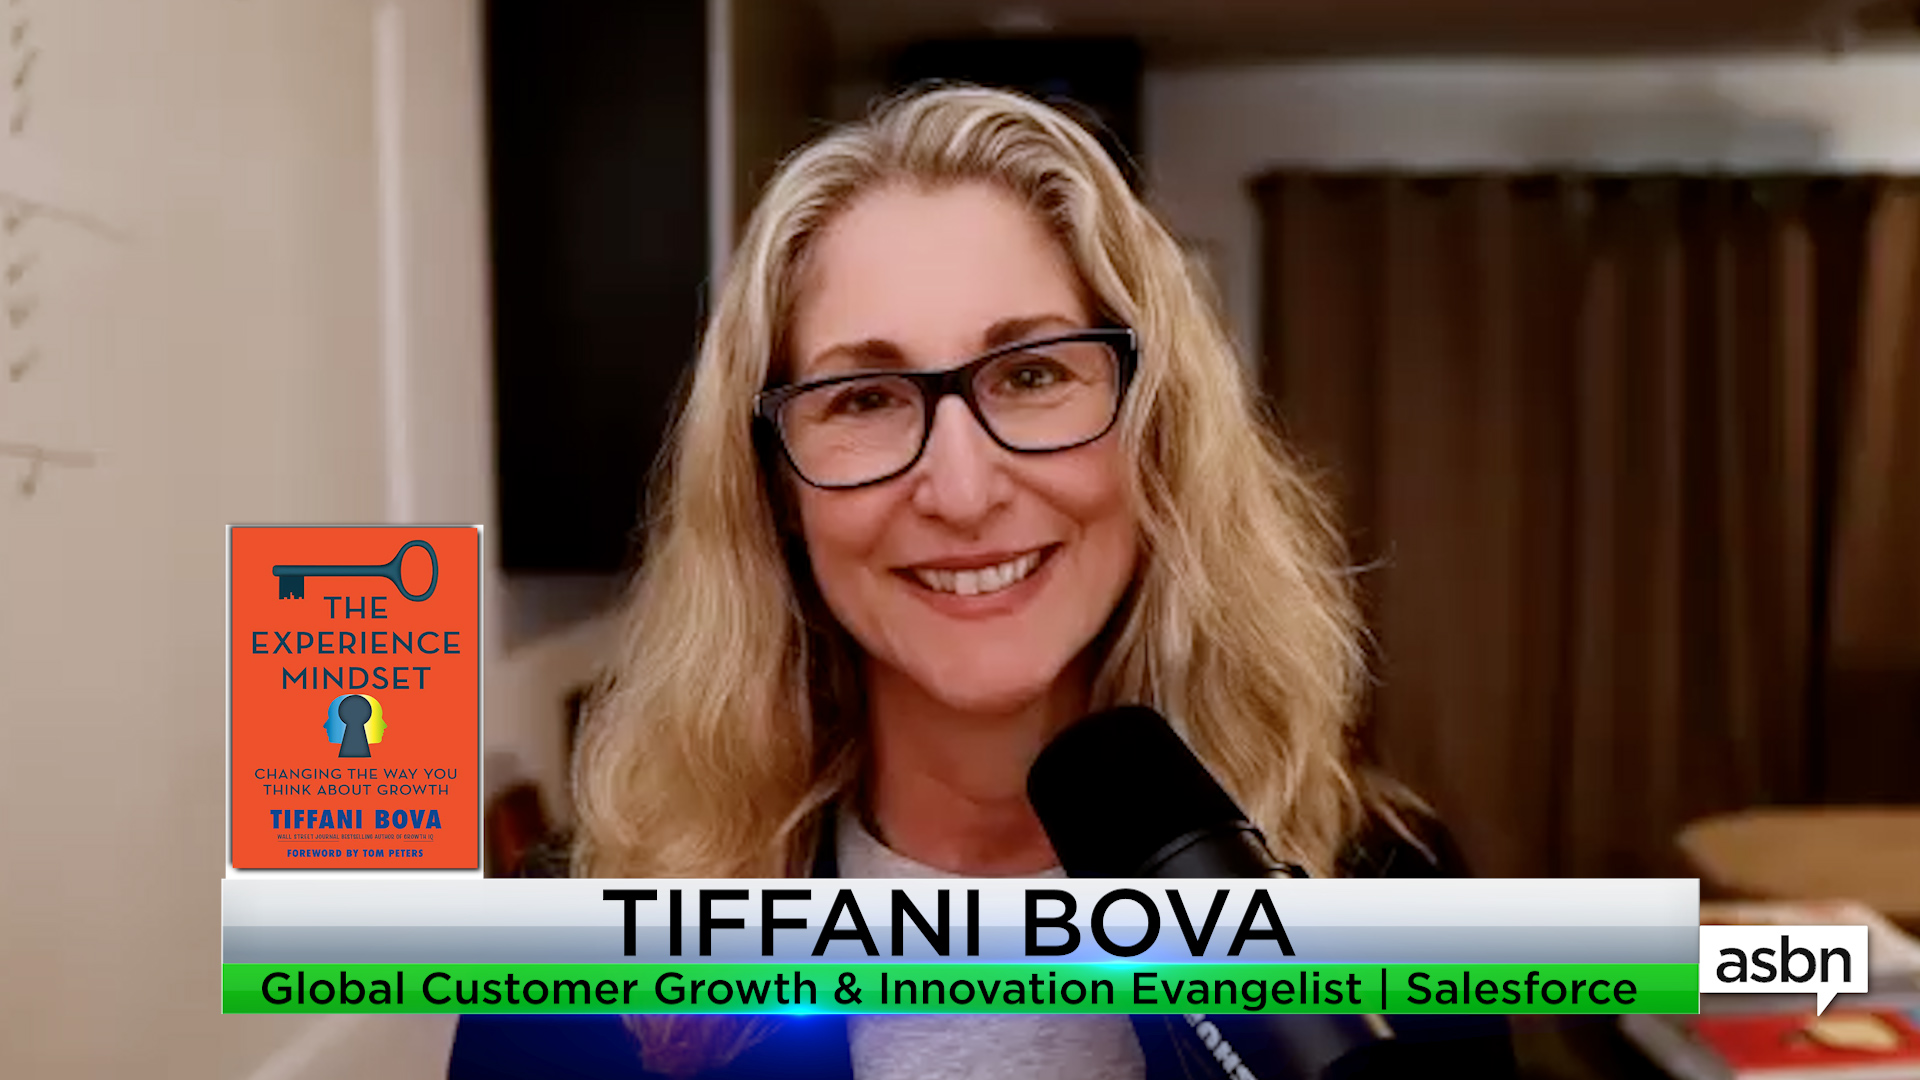 On today’s Small Business show, we’re joined by Tiffani Bova to discuss the ways to create a positive company culture and reputation. 